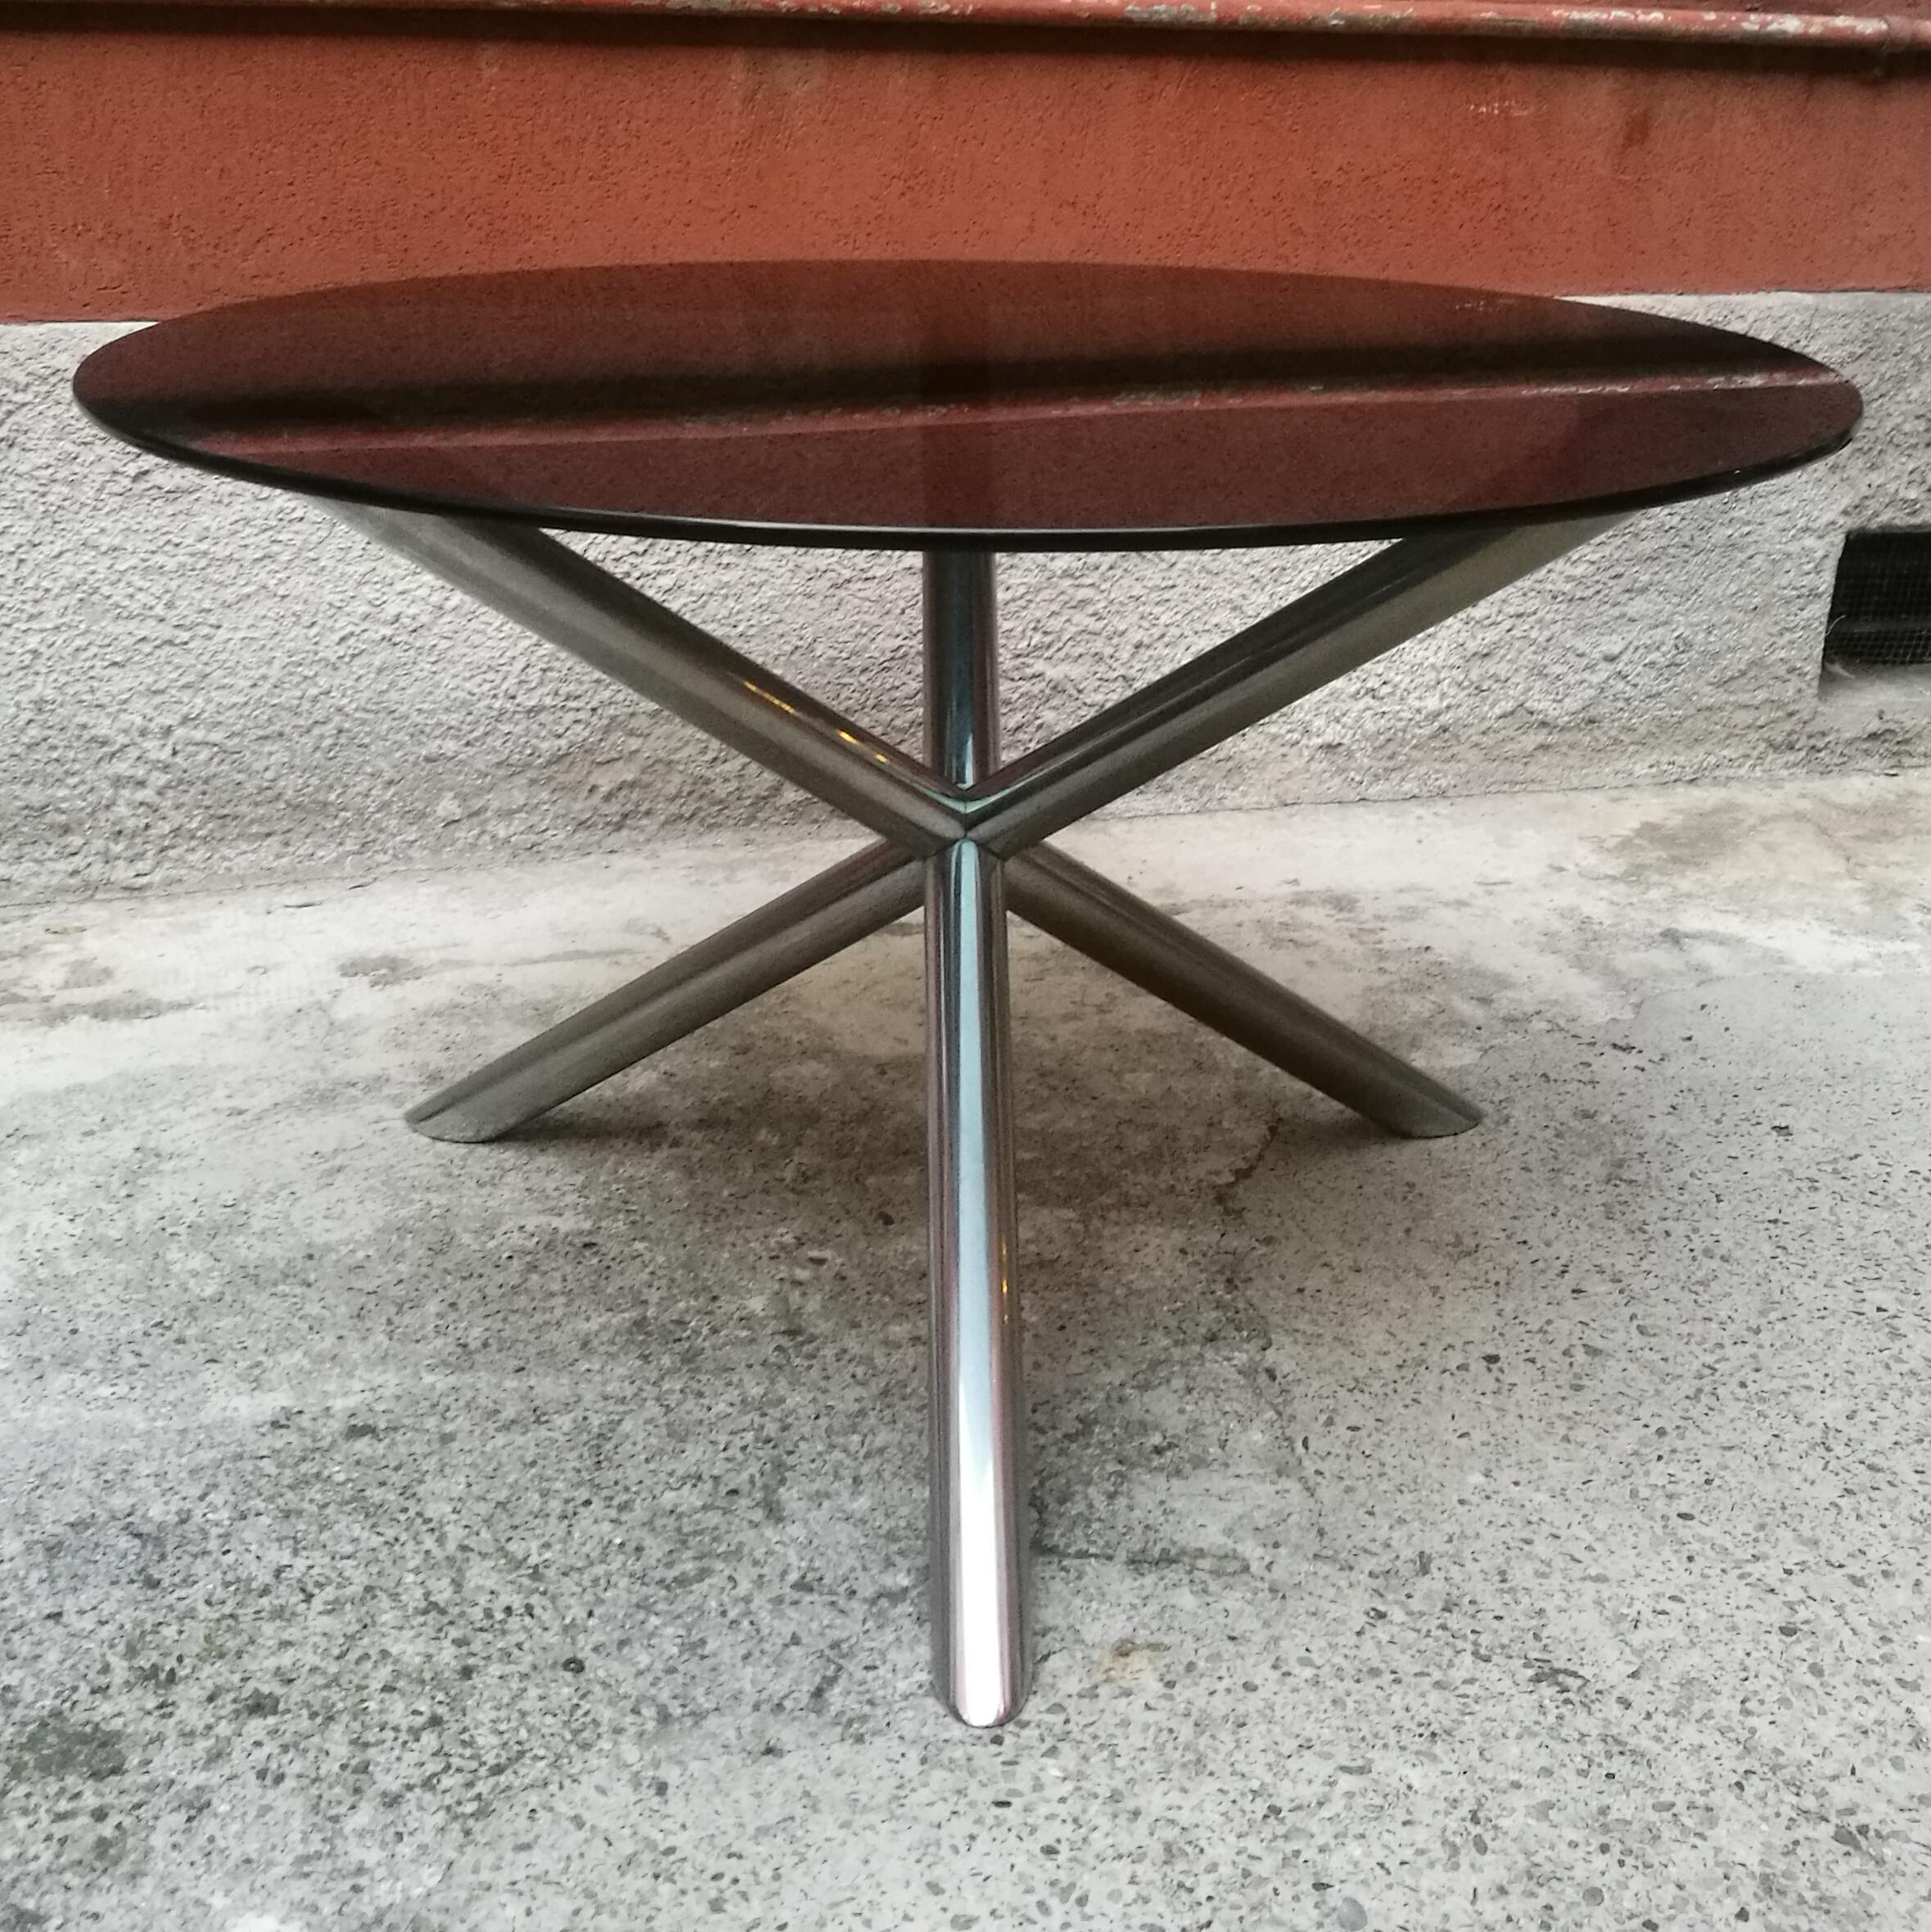 Italian round smoked glass and chromed steel dining table, 1970s
Elegant and modern round dining table with smoked glass top and massive chromed steel tripod structure
Perfect conditions.